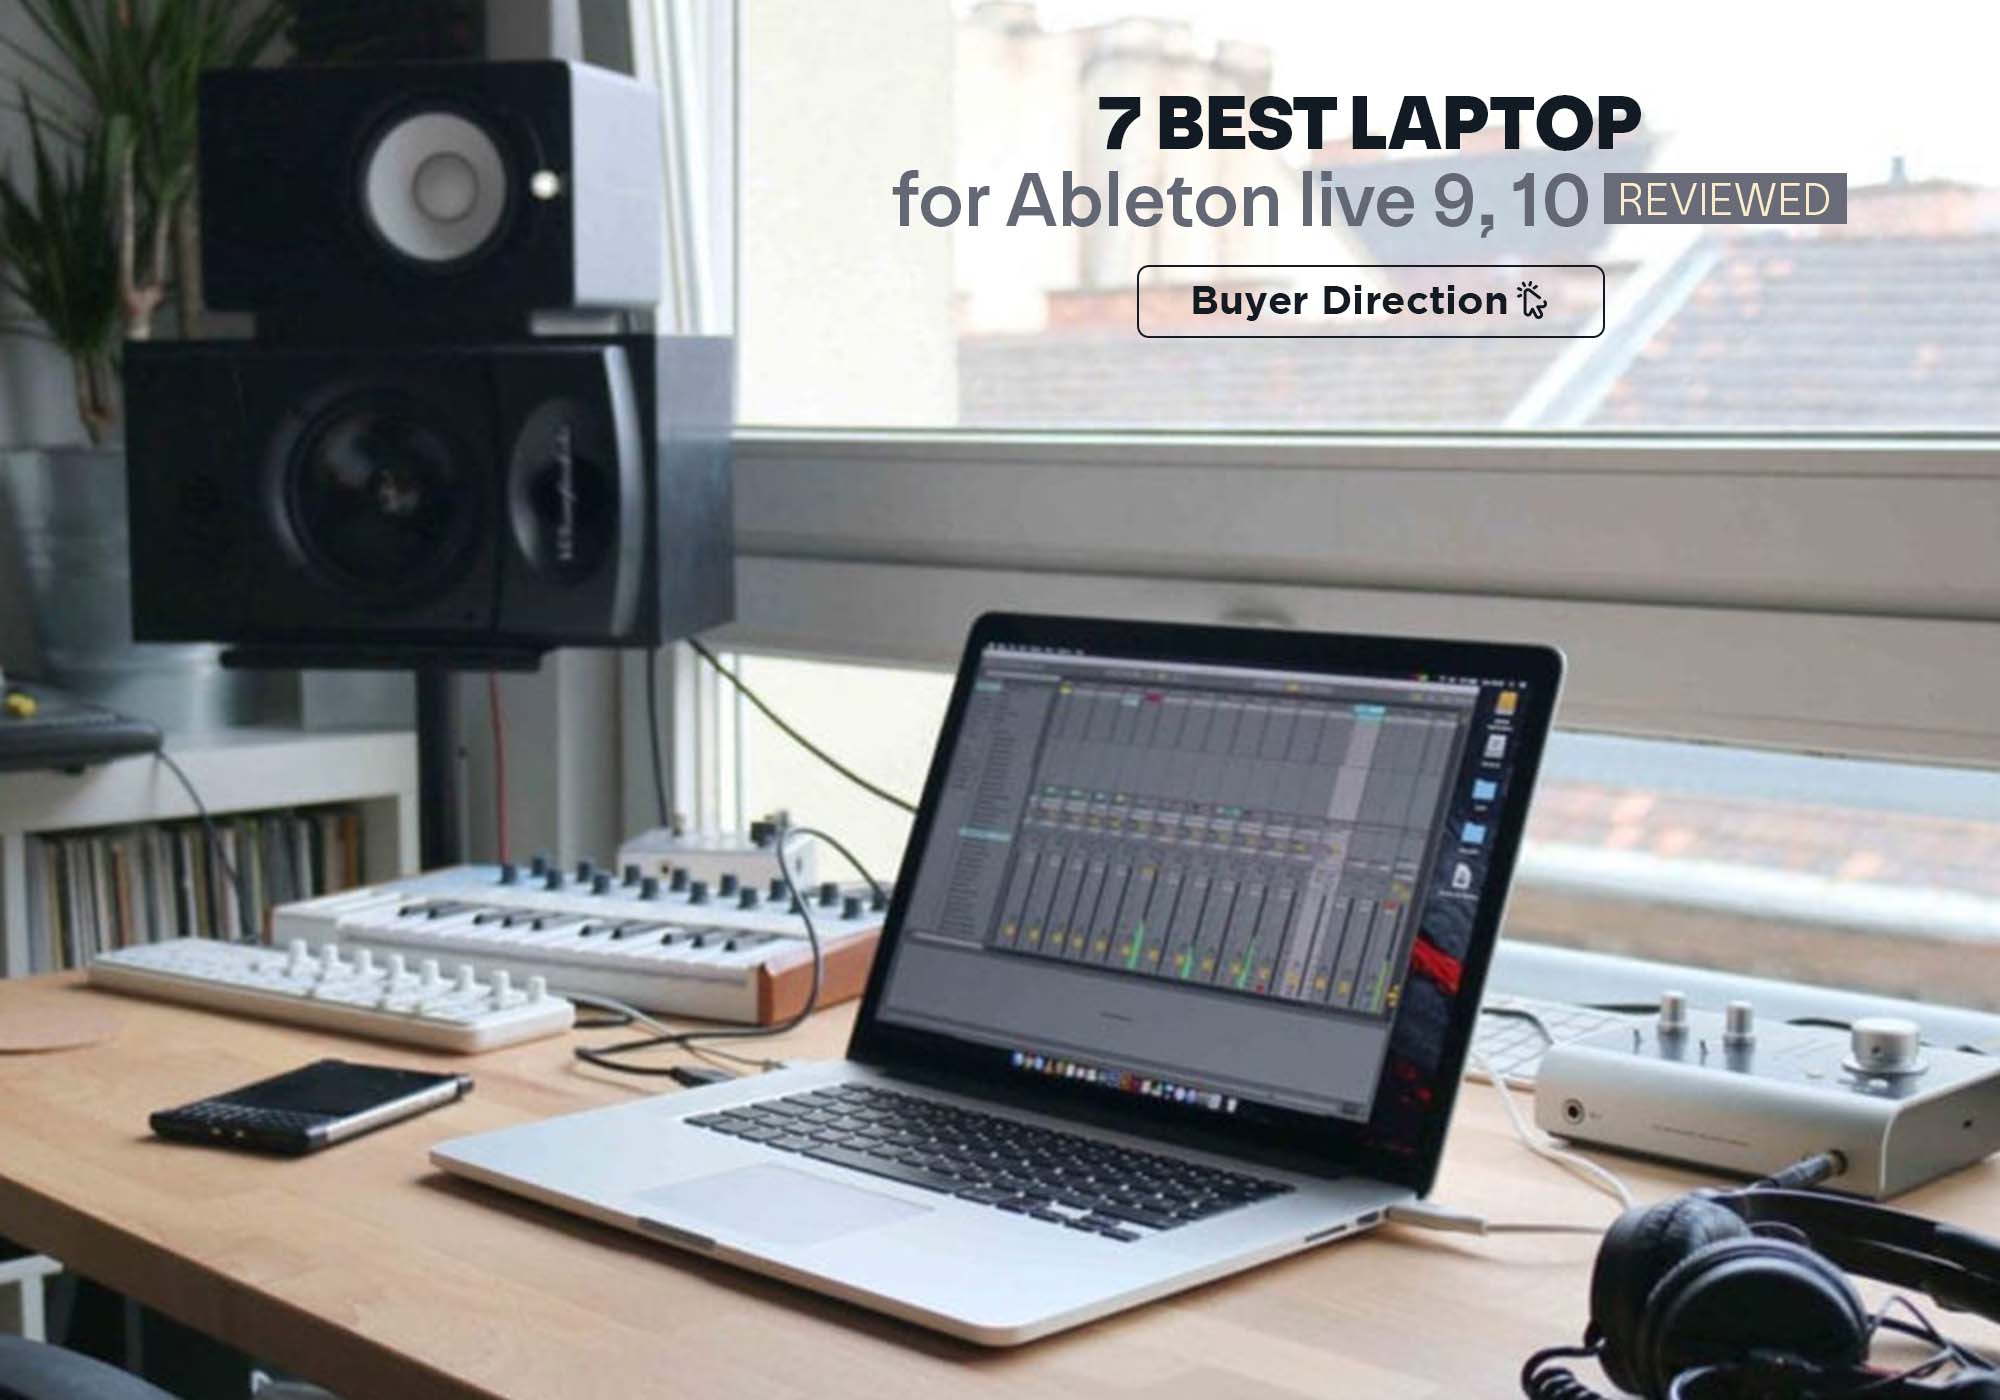 7 Best laptop for Ableton live 9, 10 in 2022 – Reviewed